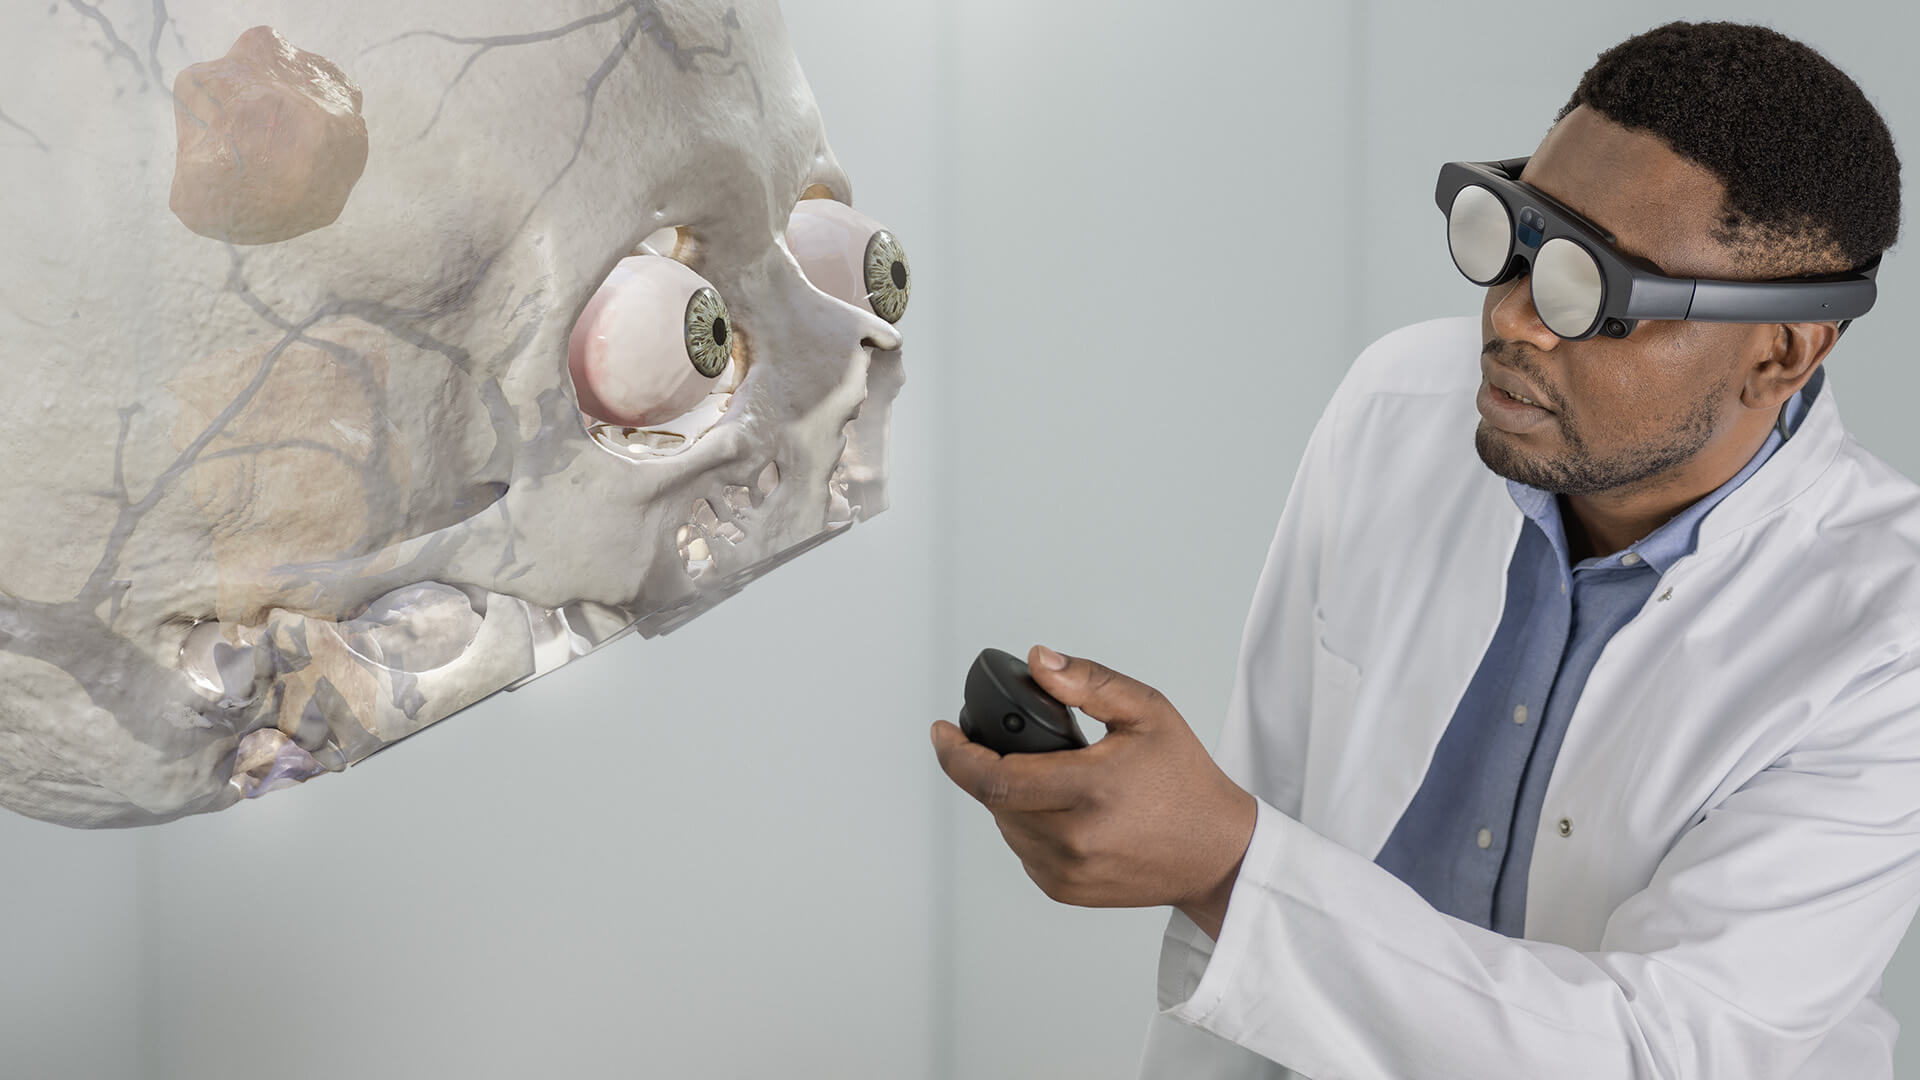 An individual using the Mixed Reality Viewer in an office, examining a cranial image